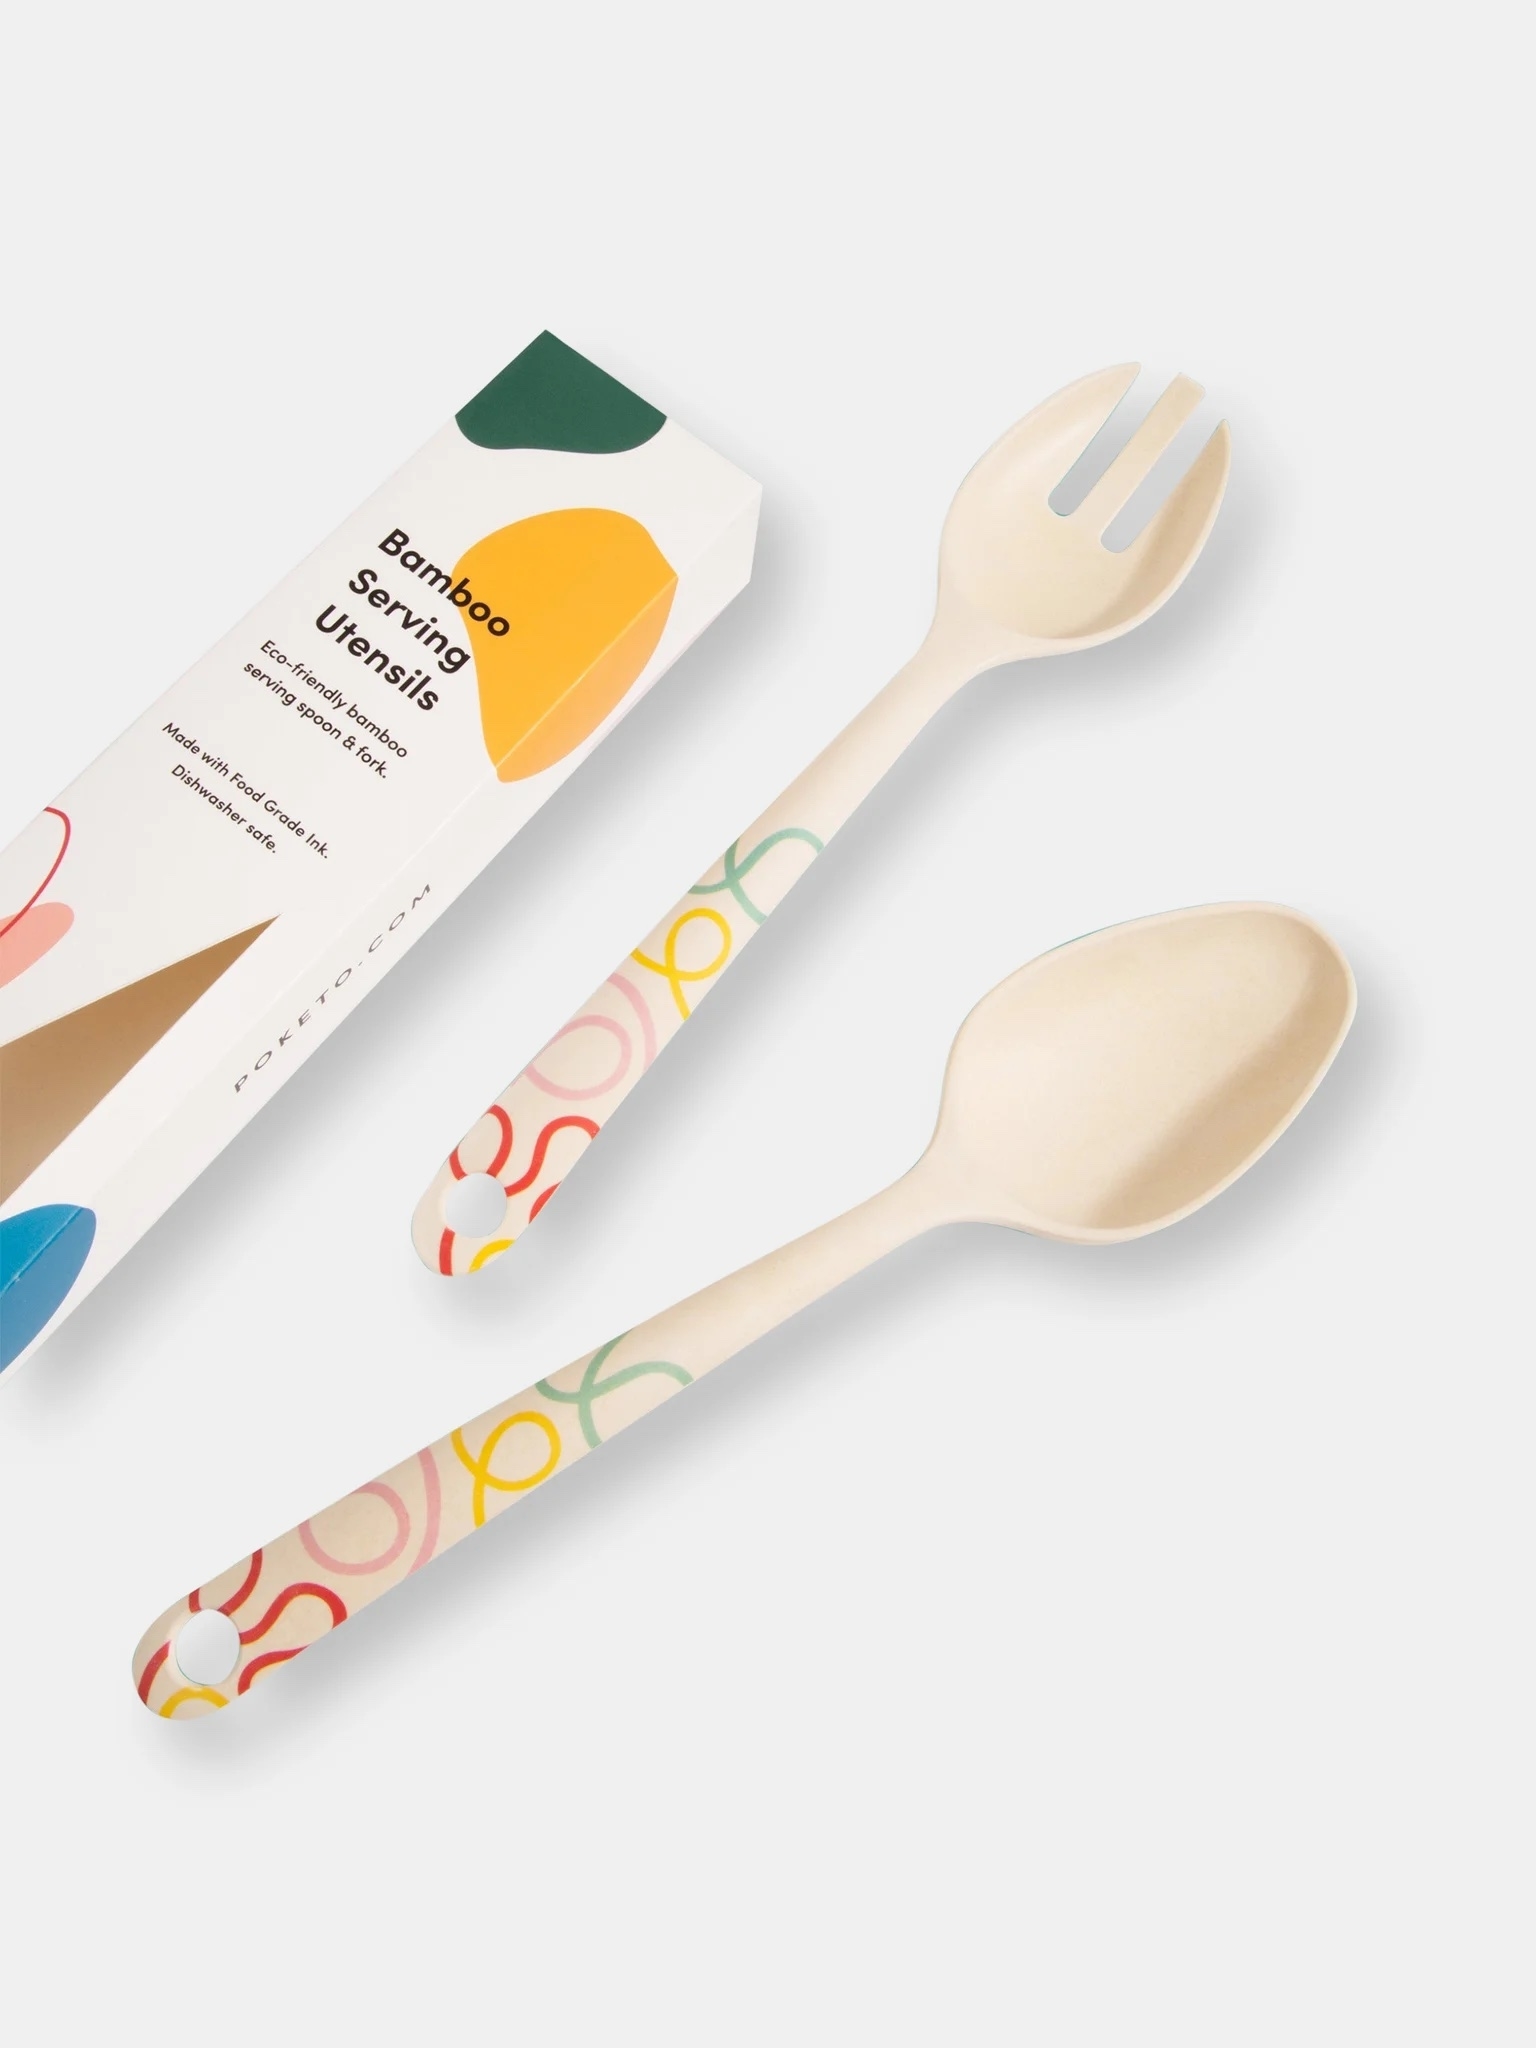 one pronged and one solid bamboo serving spoons with multicolored doodle details